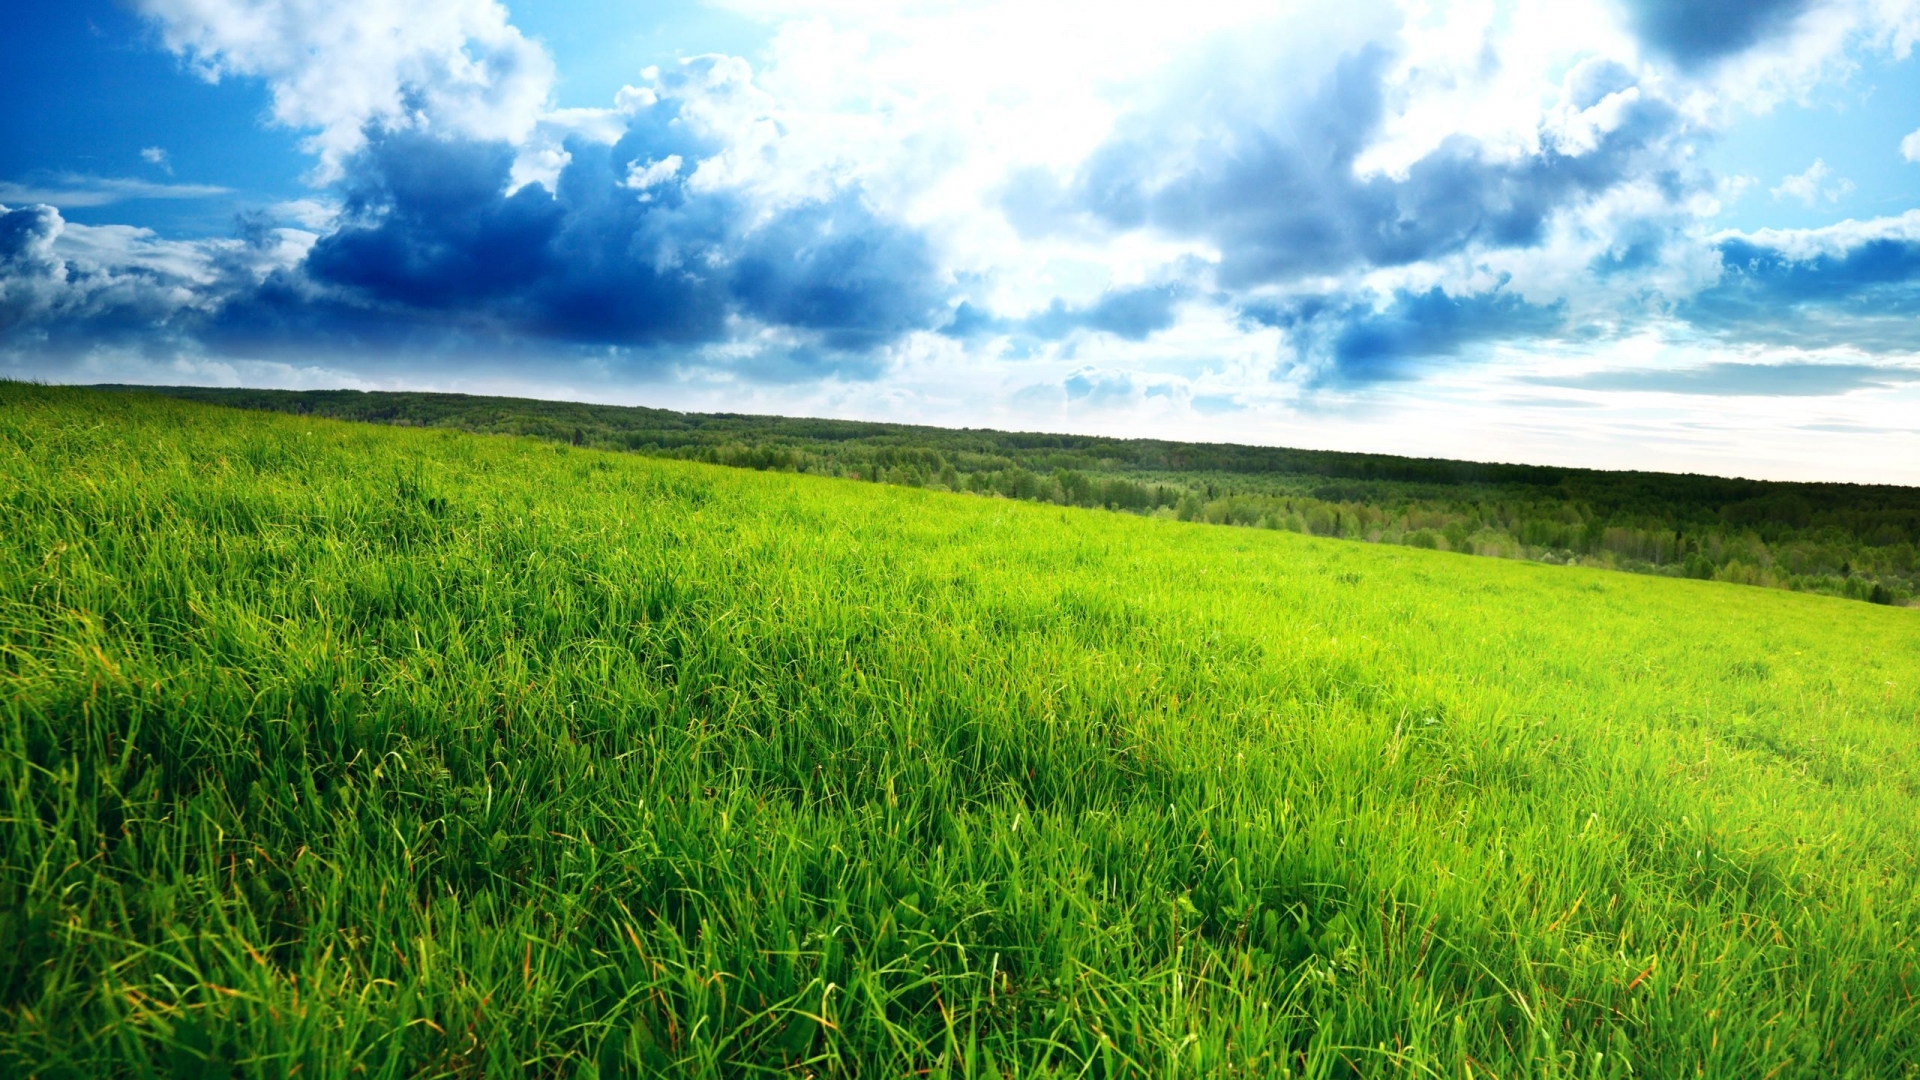 Superb Green Field for 1920 x 1080 HDTV 1080p resolution